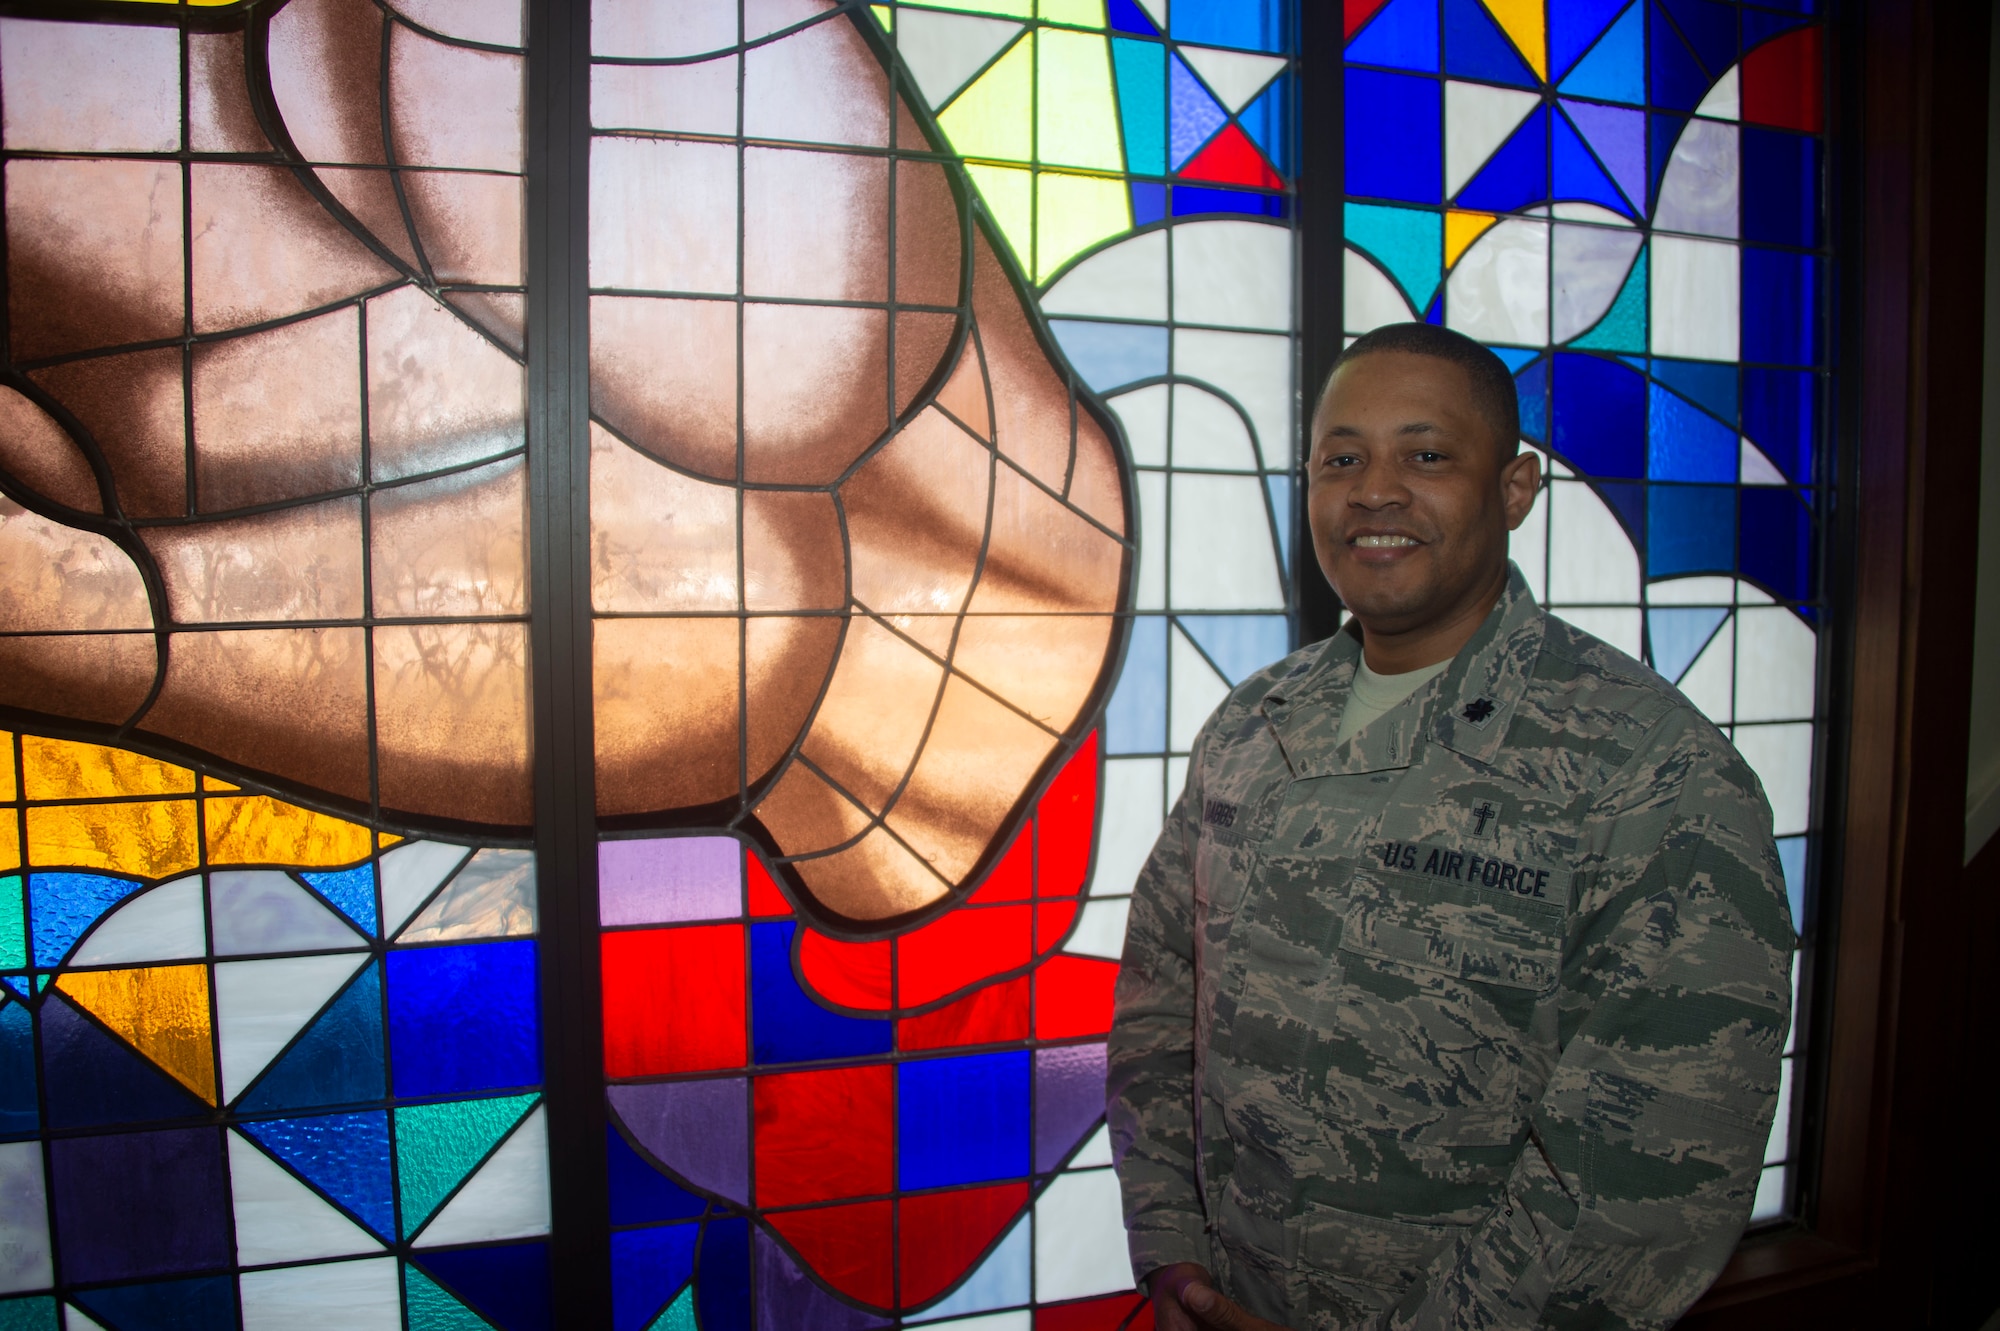 U.S. Air Force Chaplain Lt. Col. Steve Dabbs, the wing Chaplin of the 97th Air Mobility Wing, stands by the Chapels stained glass, Feb. 25, 2019, at Altus Air Force Base, Okla